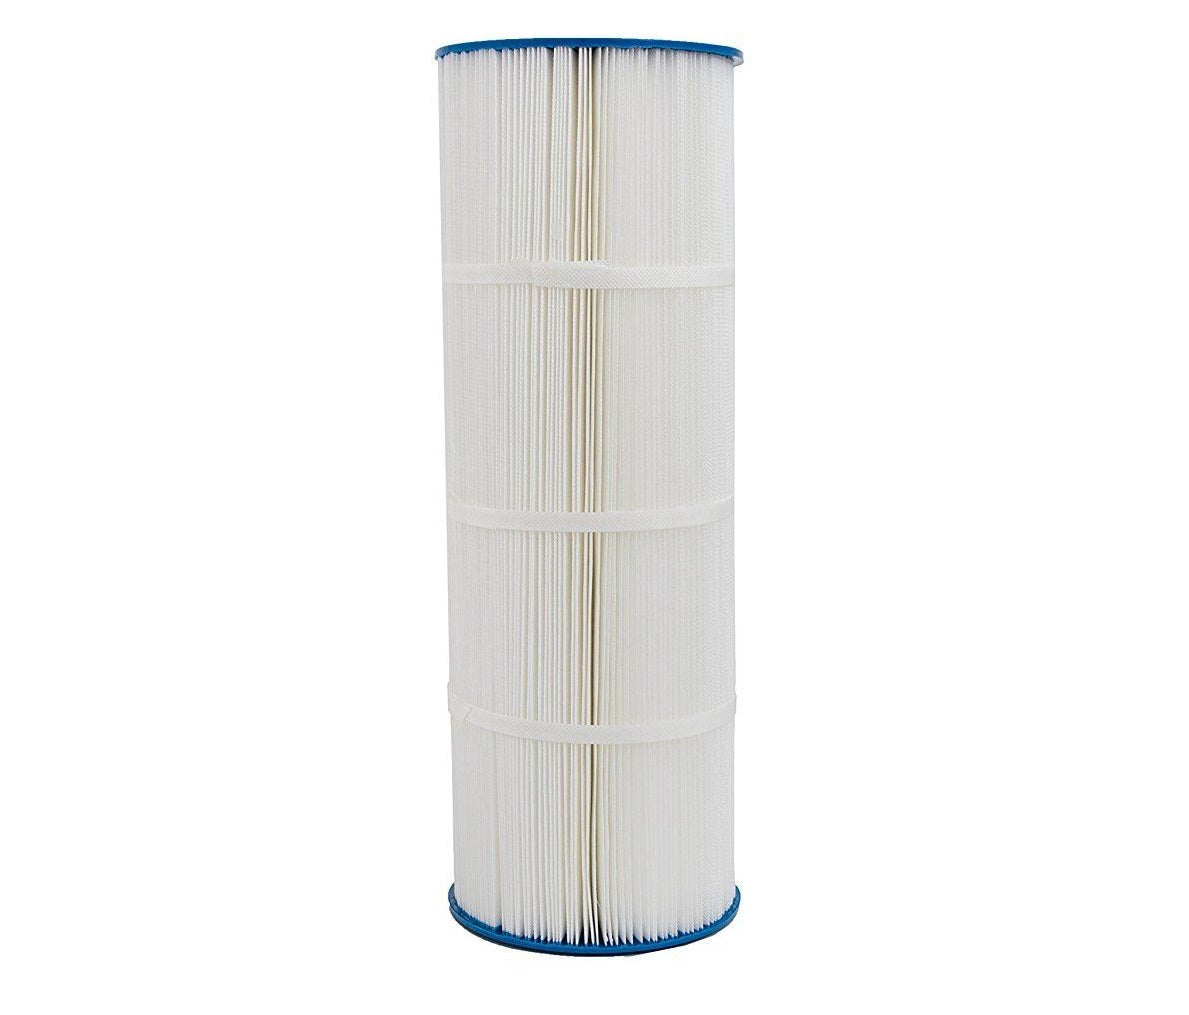 LifeSupplyUSA 8 Pack Pool Filter Cartridge 20" x 7" for Pleatco PCC80, Pentair Clean and Clear Plus 320, Unicel C-7470 fits R173573 178580...